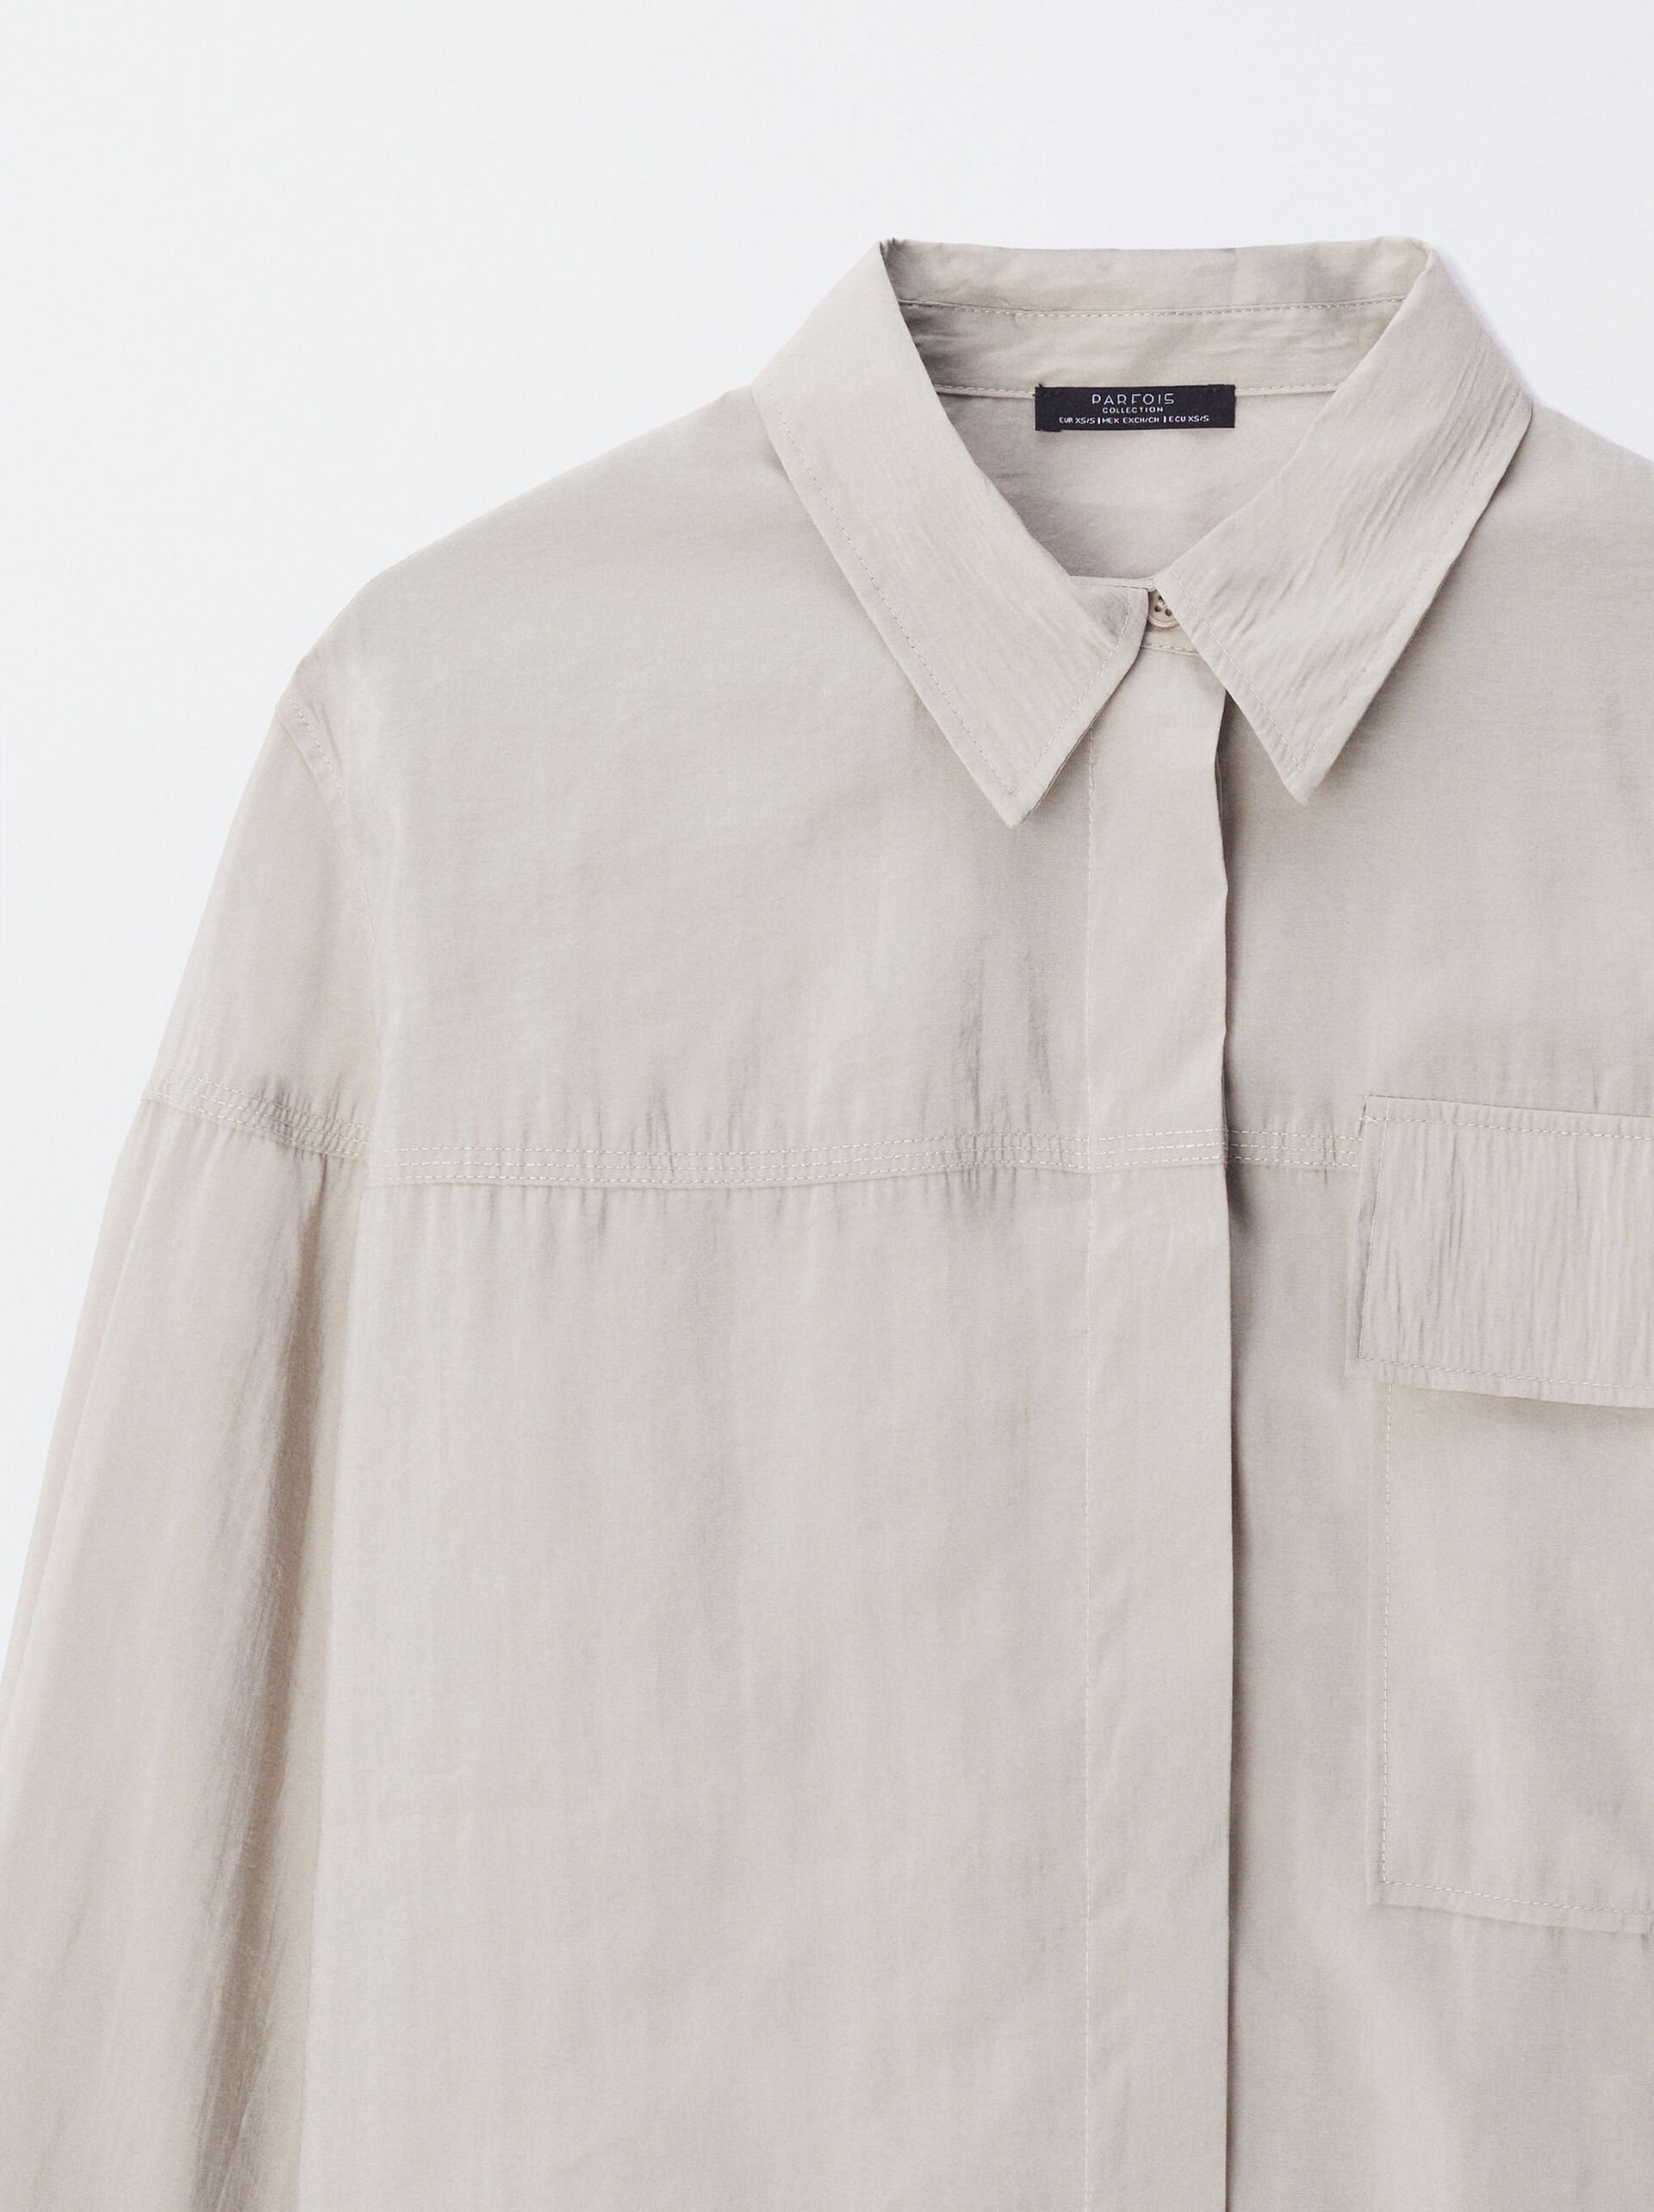 Online Exclusive - Long-Sleeve Shirt With Buttons